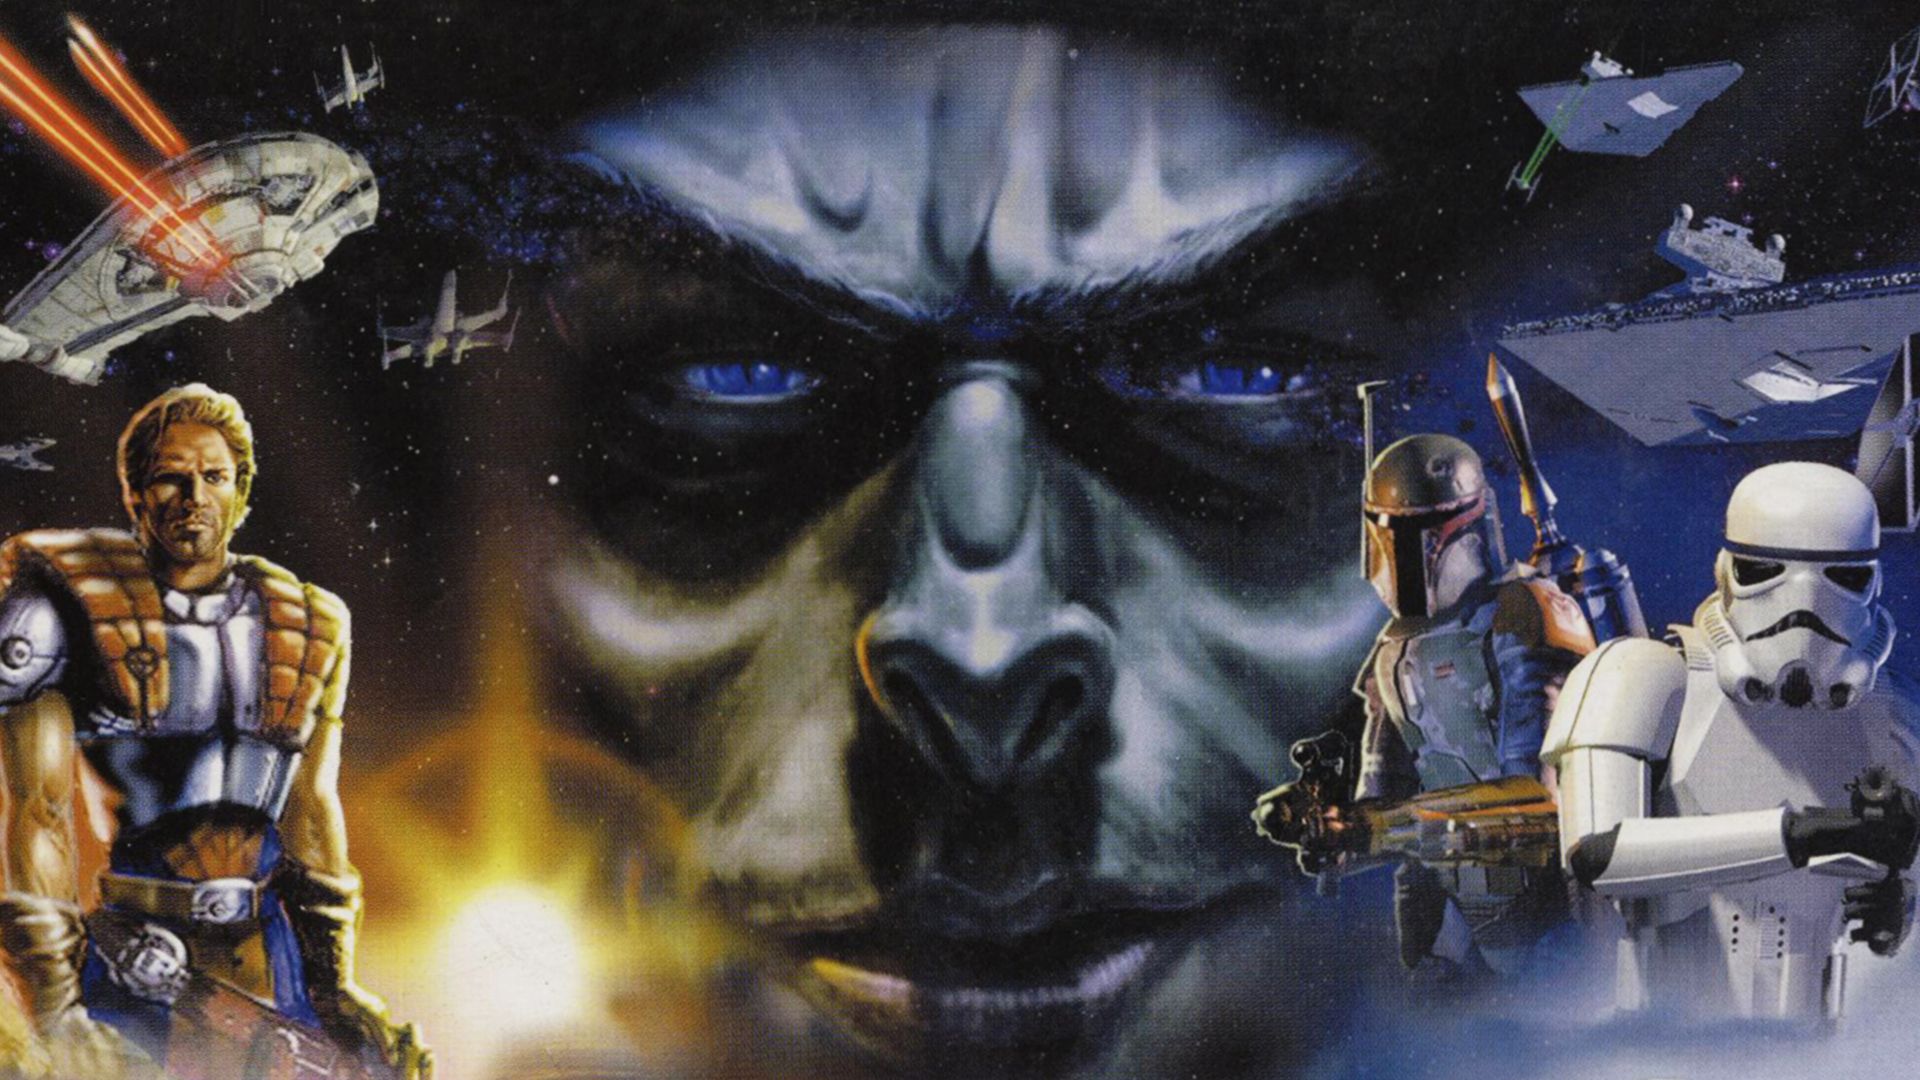 25 Years Ago Dash Rendar Blasted His Way Onto The Nintendo 64 In Shadows Of The Empire